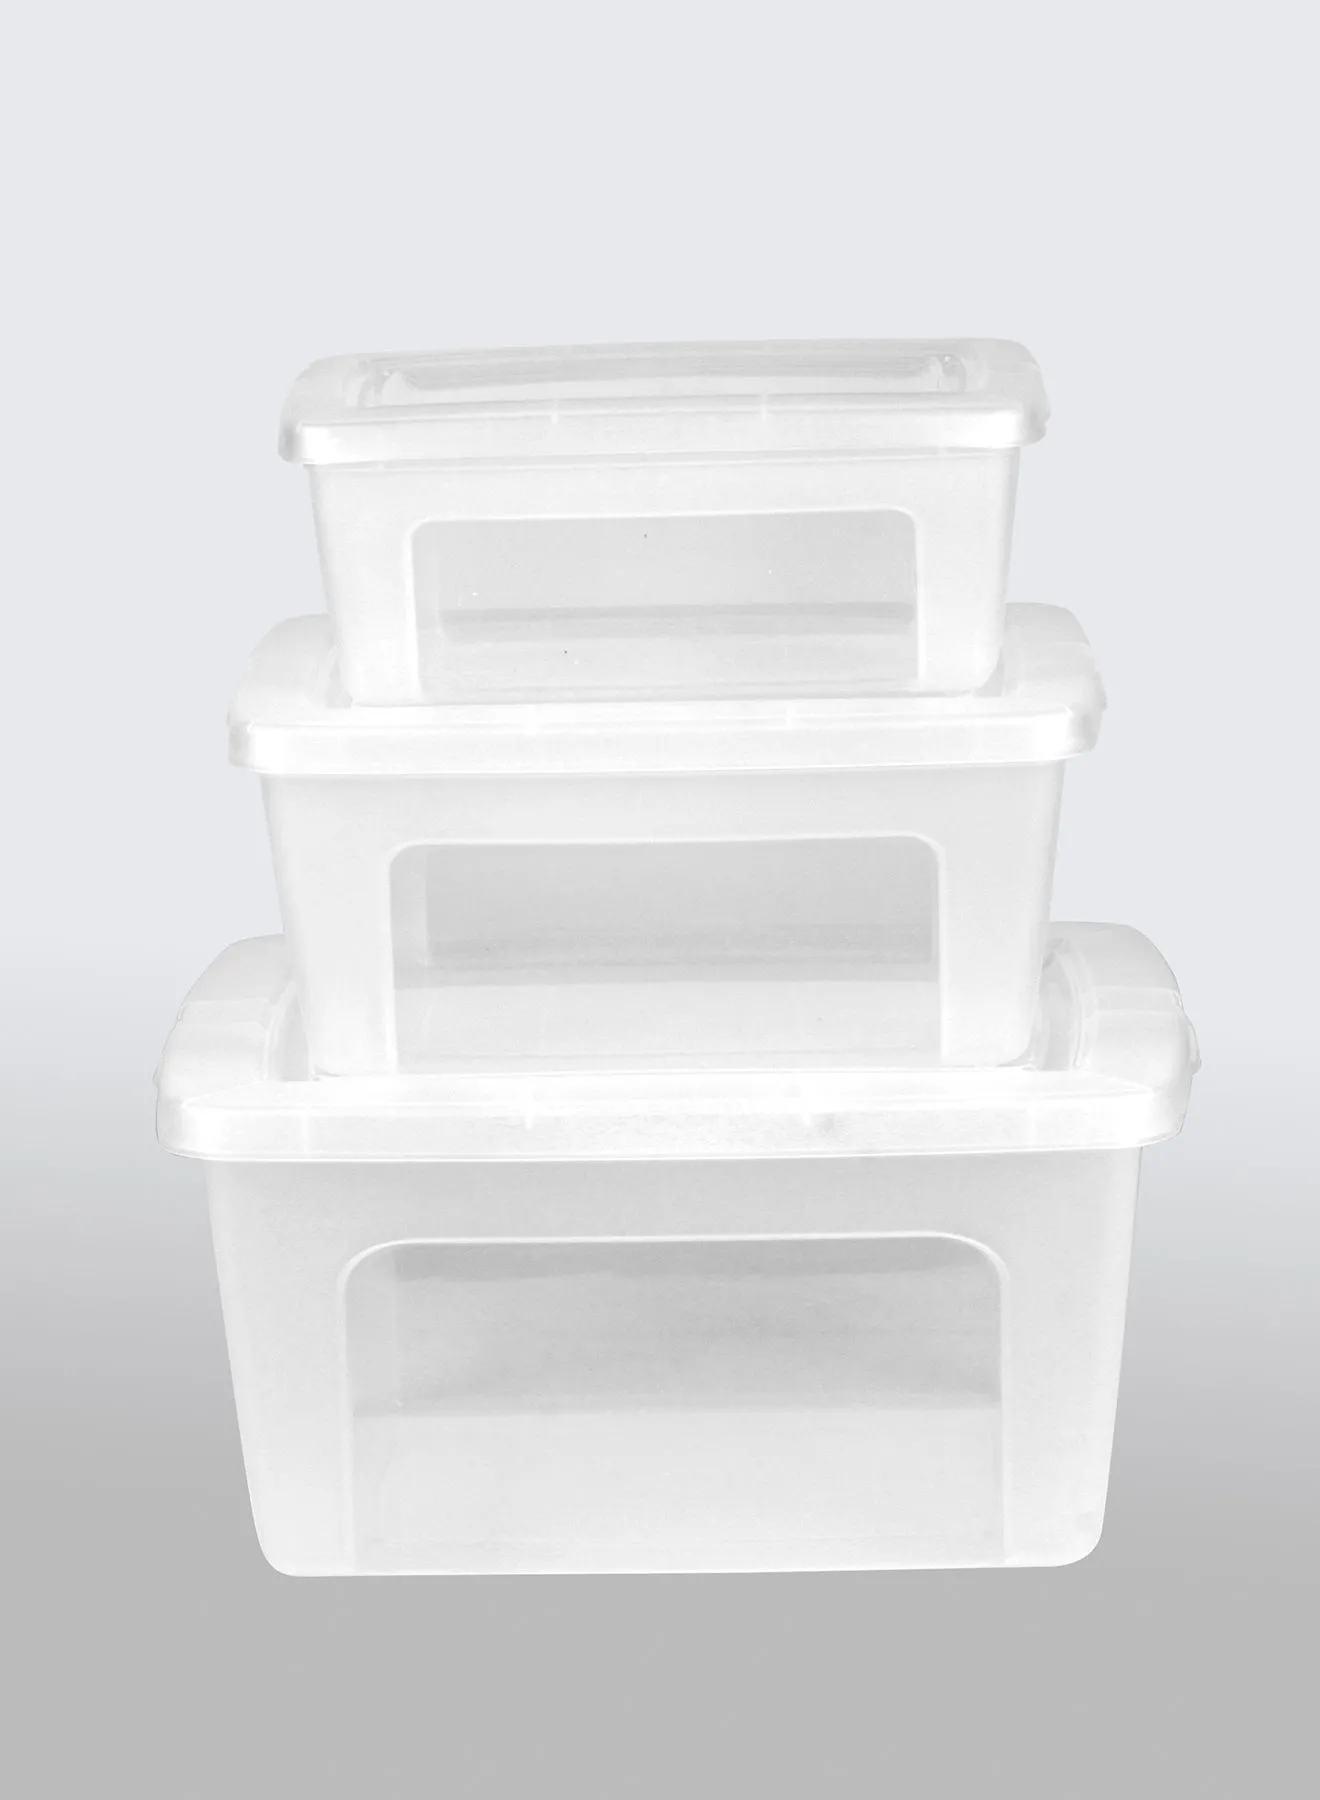 Amal 3 Piece Storage Box Set Easy Find Vented Lids Food Storage Containers durable container walls for everyday use TG54975S3 Clear 19 x 39 x 30cm